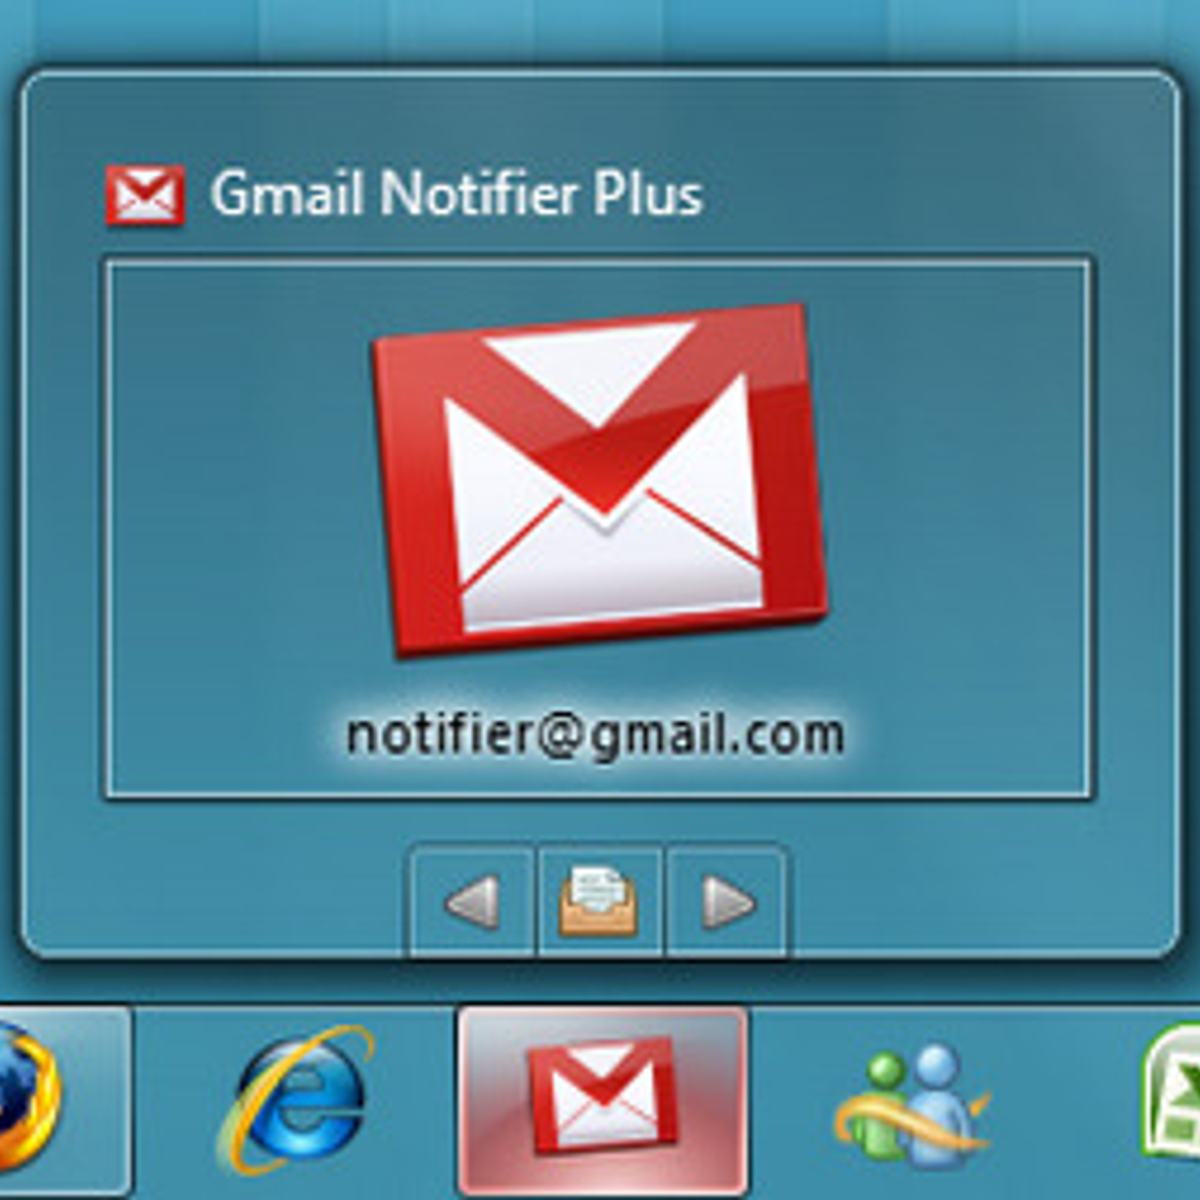 Gmail Notifier Plus for Windows 7 Alternatives and Similar Software